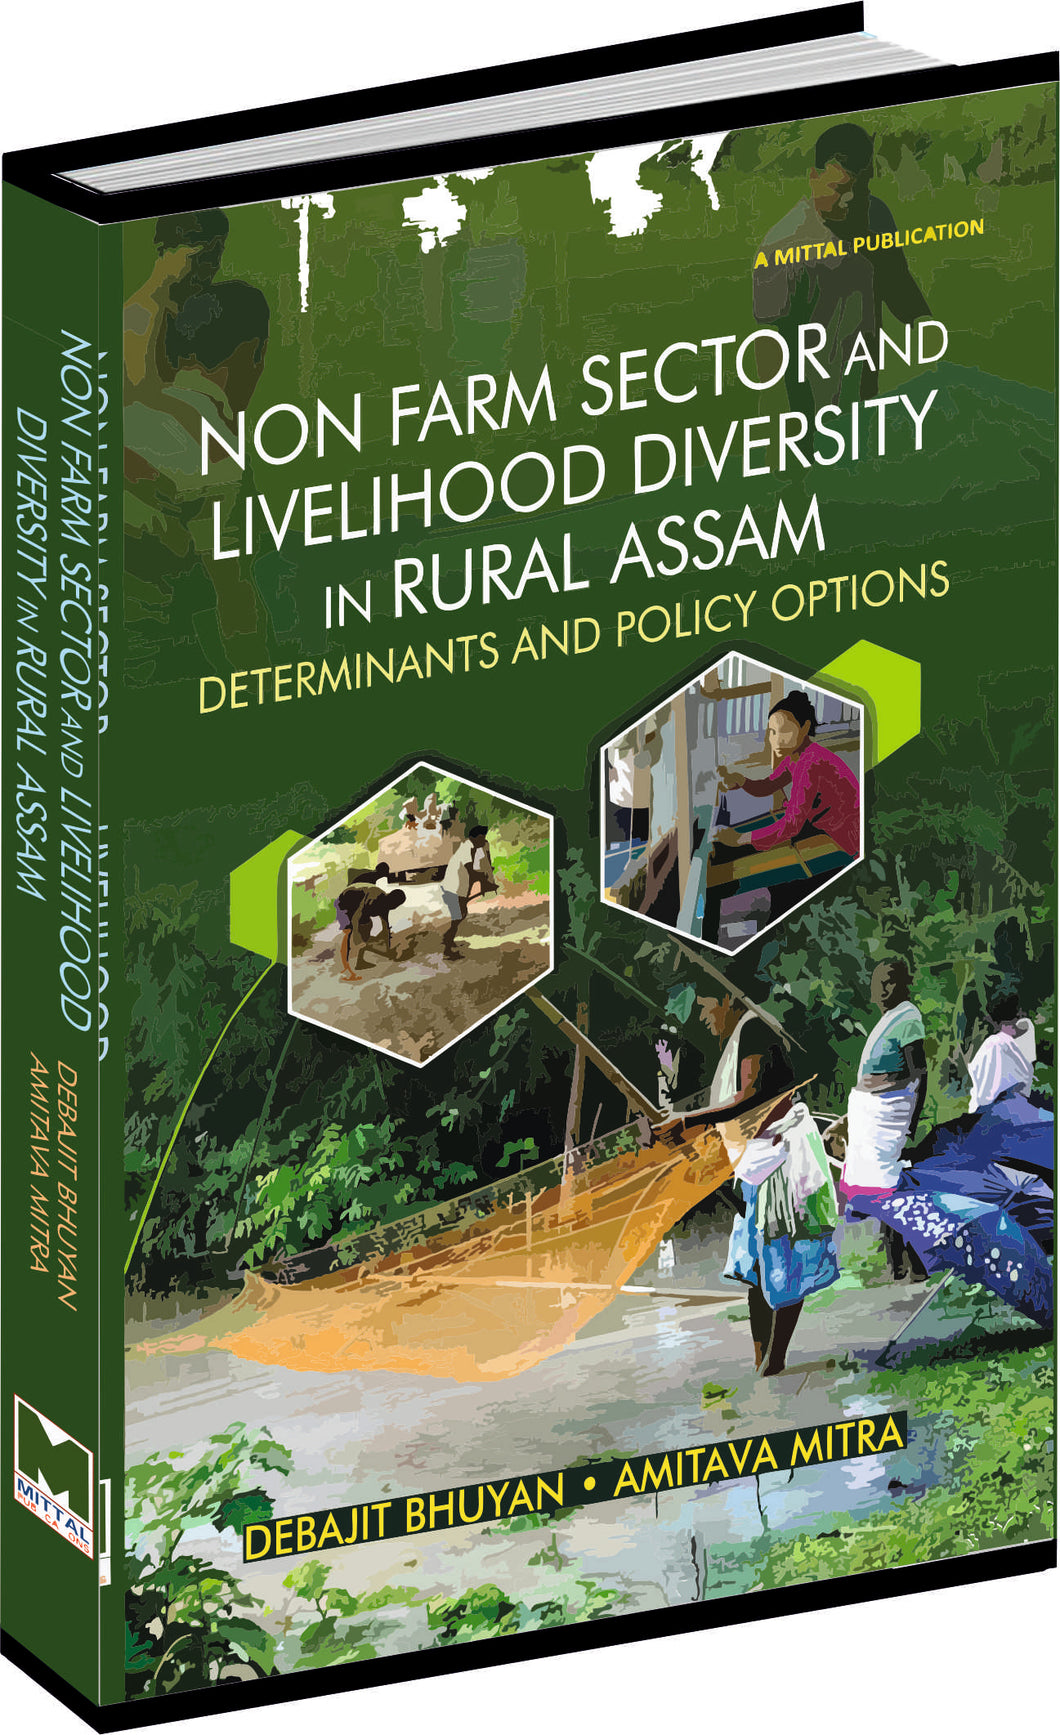 Non-Farm Sector and Livelihood Diversity in Rural Assam: Determinants and Policy Options by Debajit Bhuyan & Amitava Mitra